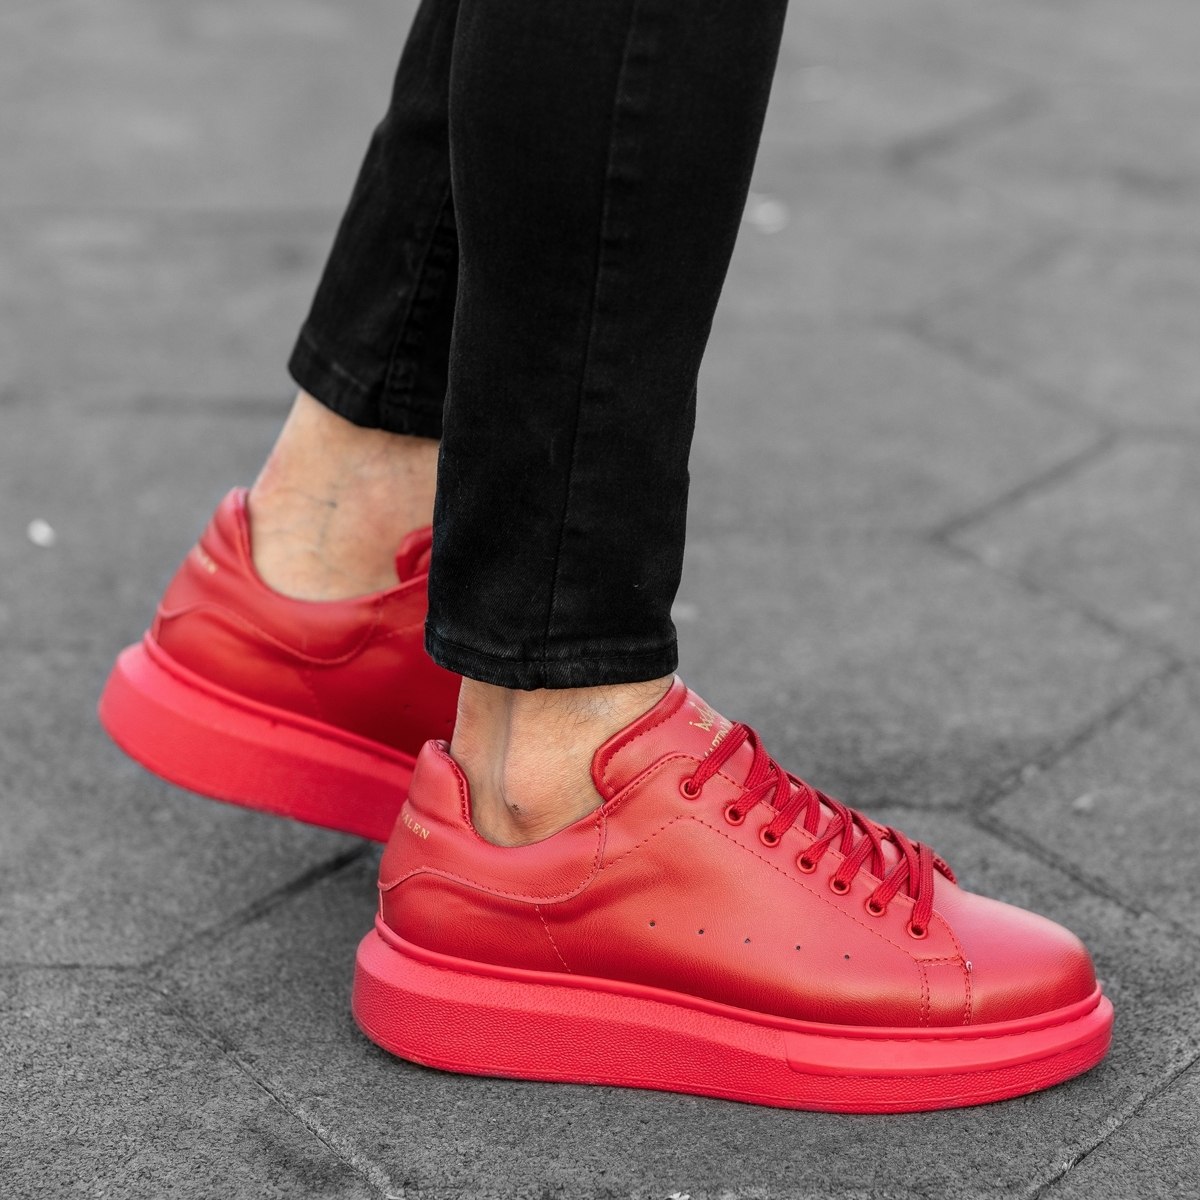 Hype Sole Sneakers In Full Red | Martin Valen